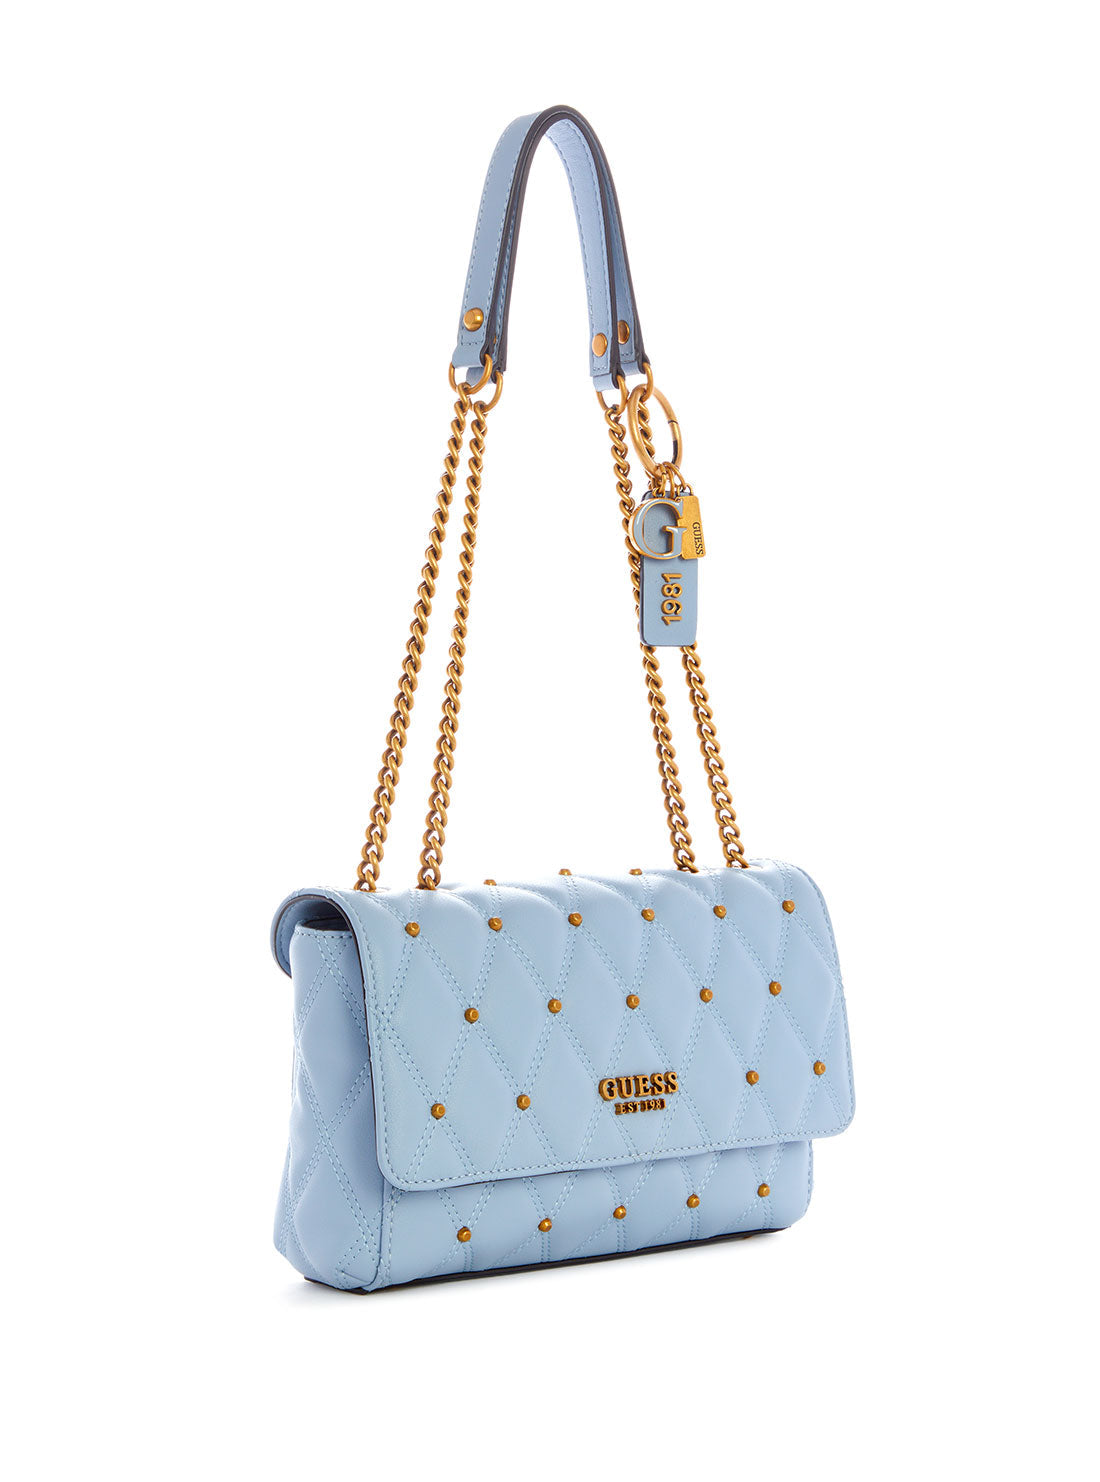 GUESS Womens Blue Triana Convertible Crossbody Bag QS855321 Front Side View